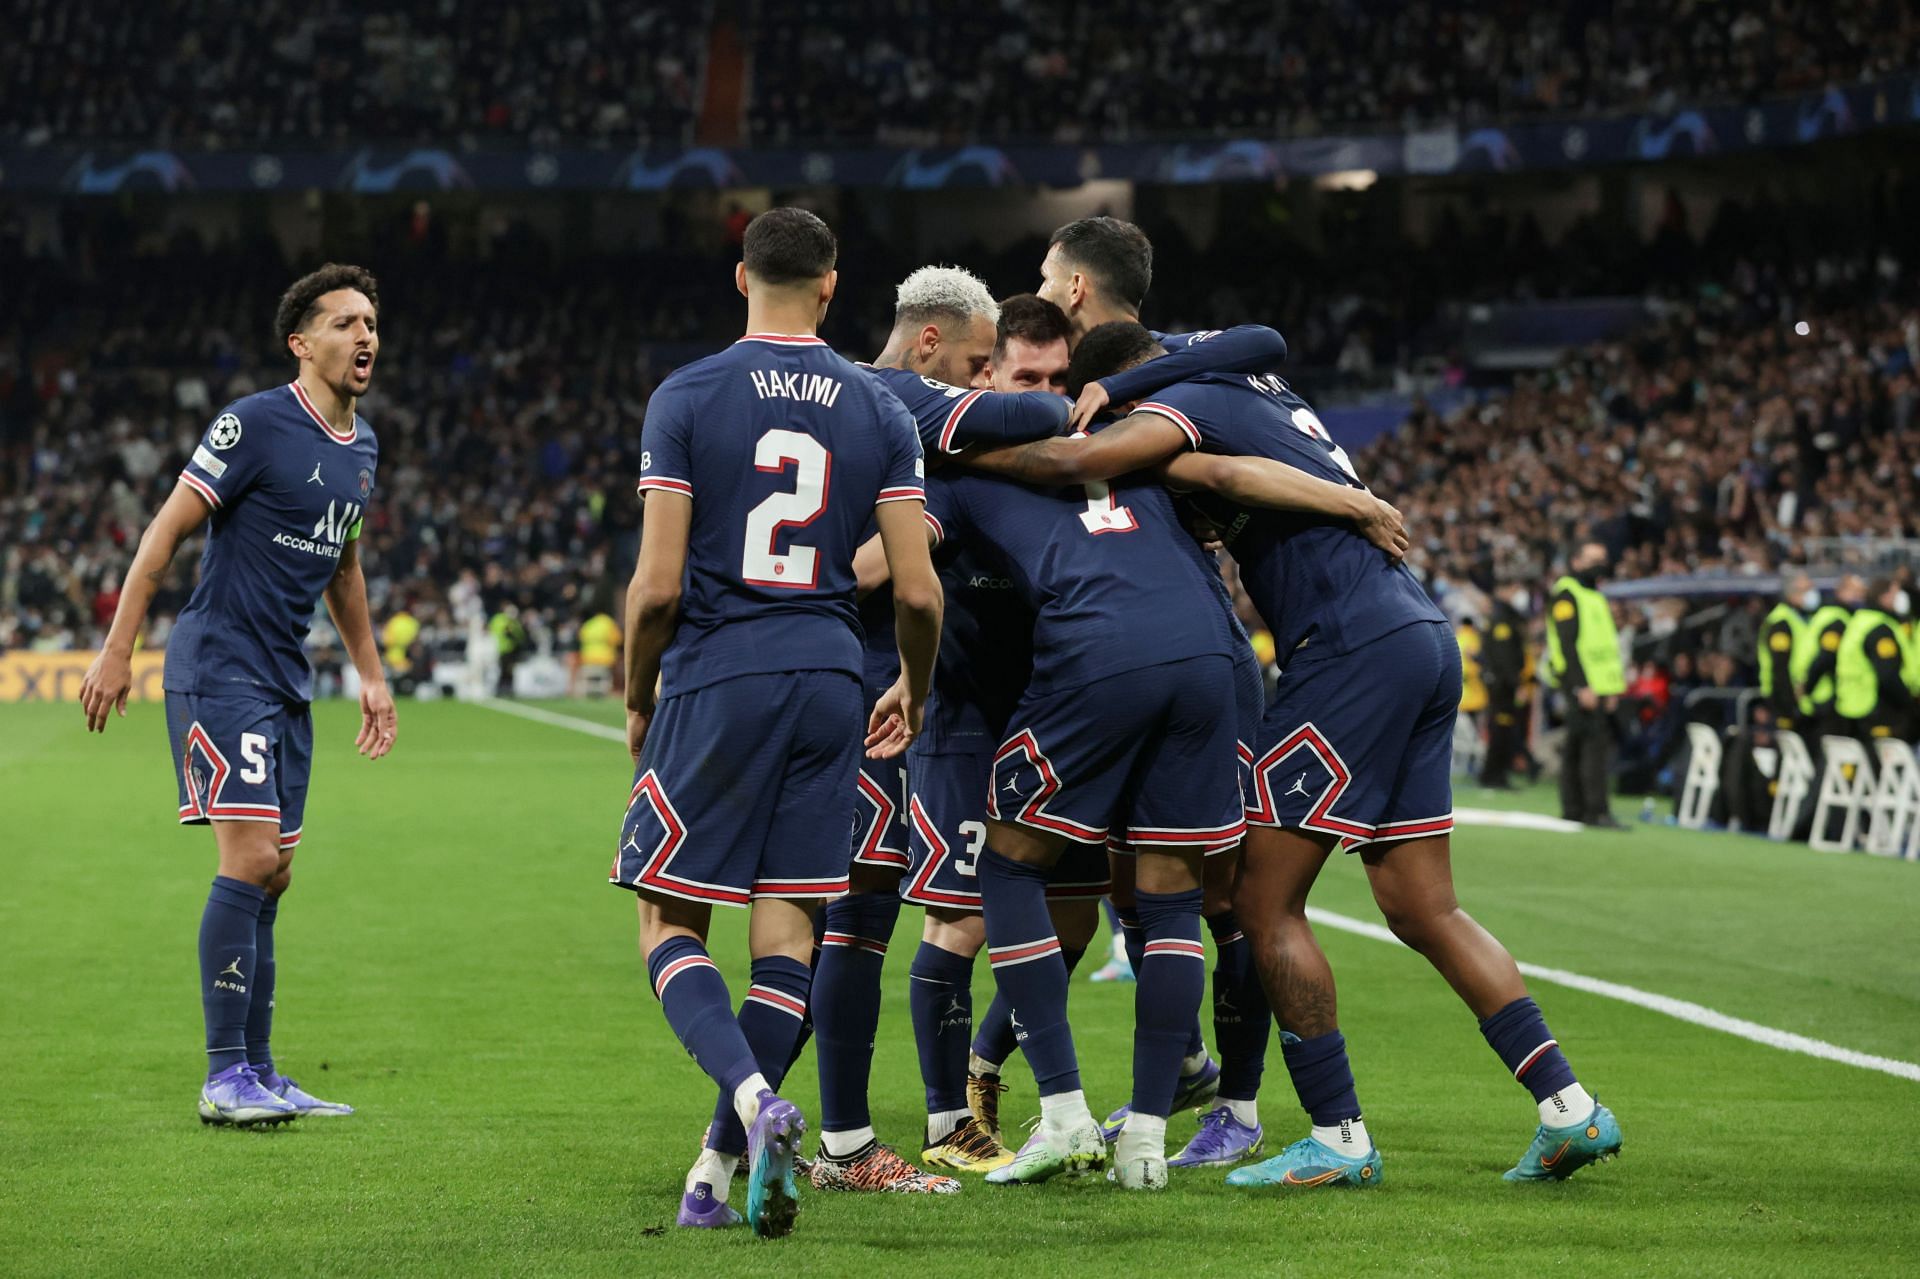 The Paris giants have dominated Ligue 1 this season despite Messi&#039;s rather underwhelming form